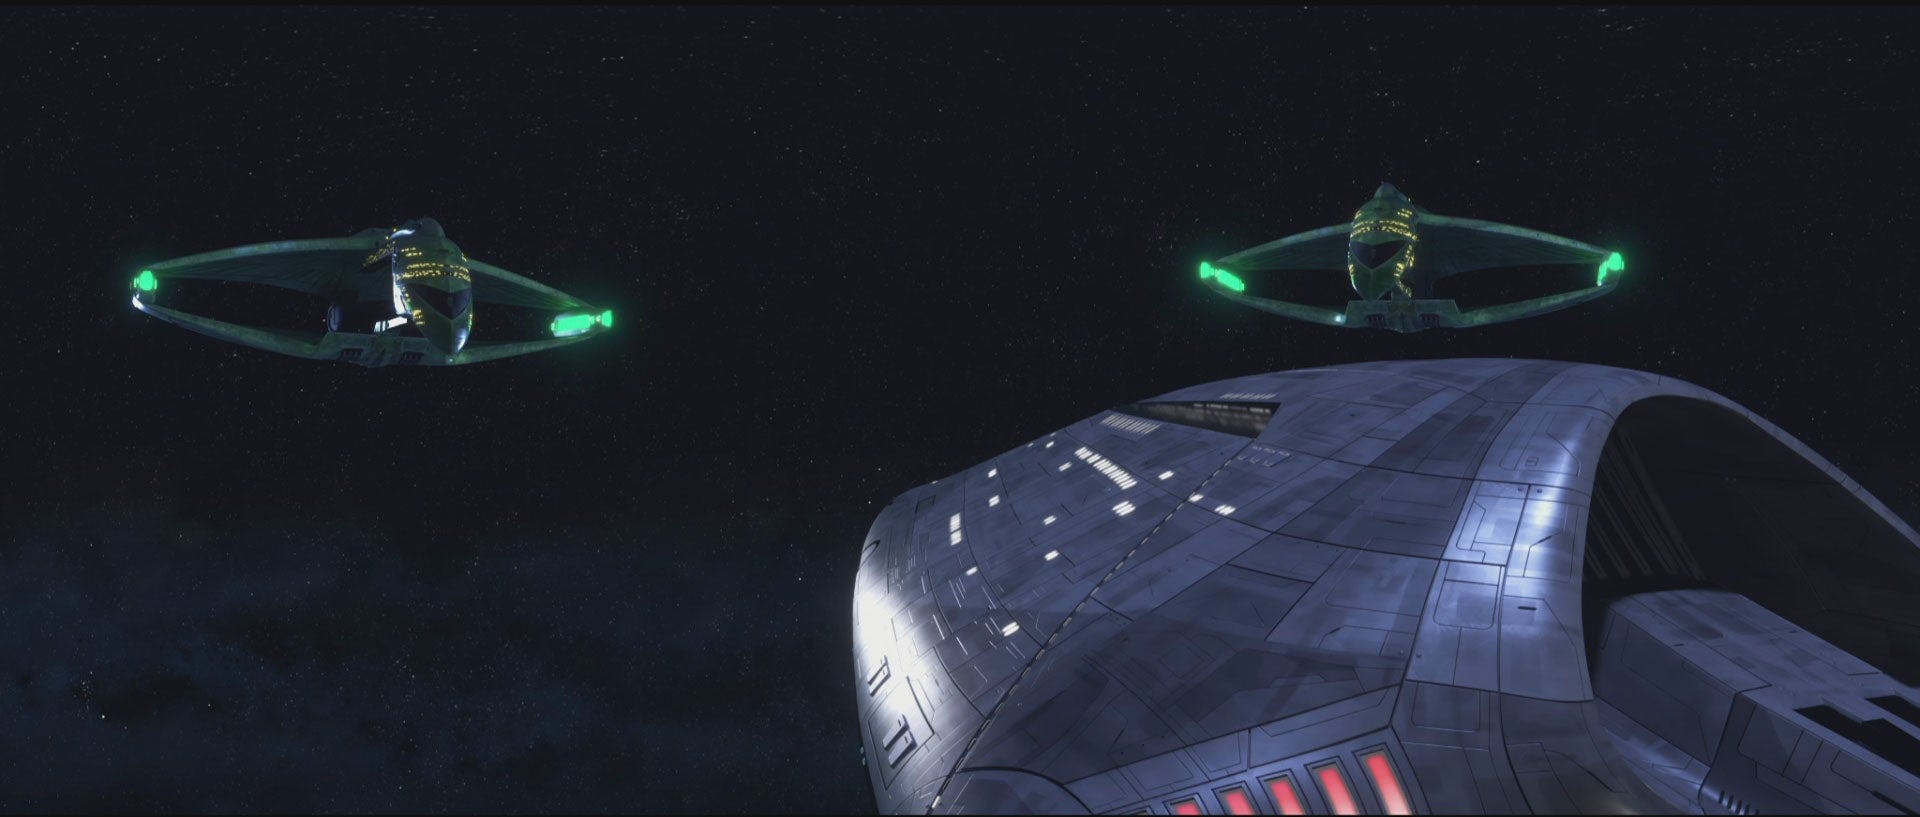 Two Romulan warbirds guard the Neutral Zone.